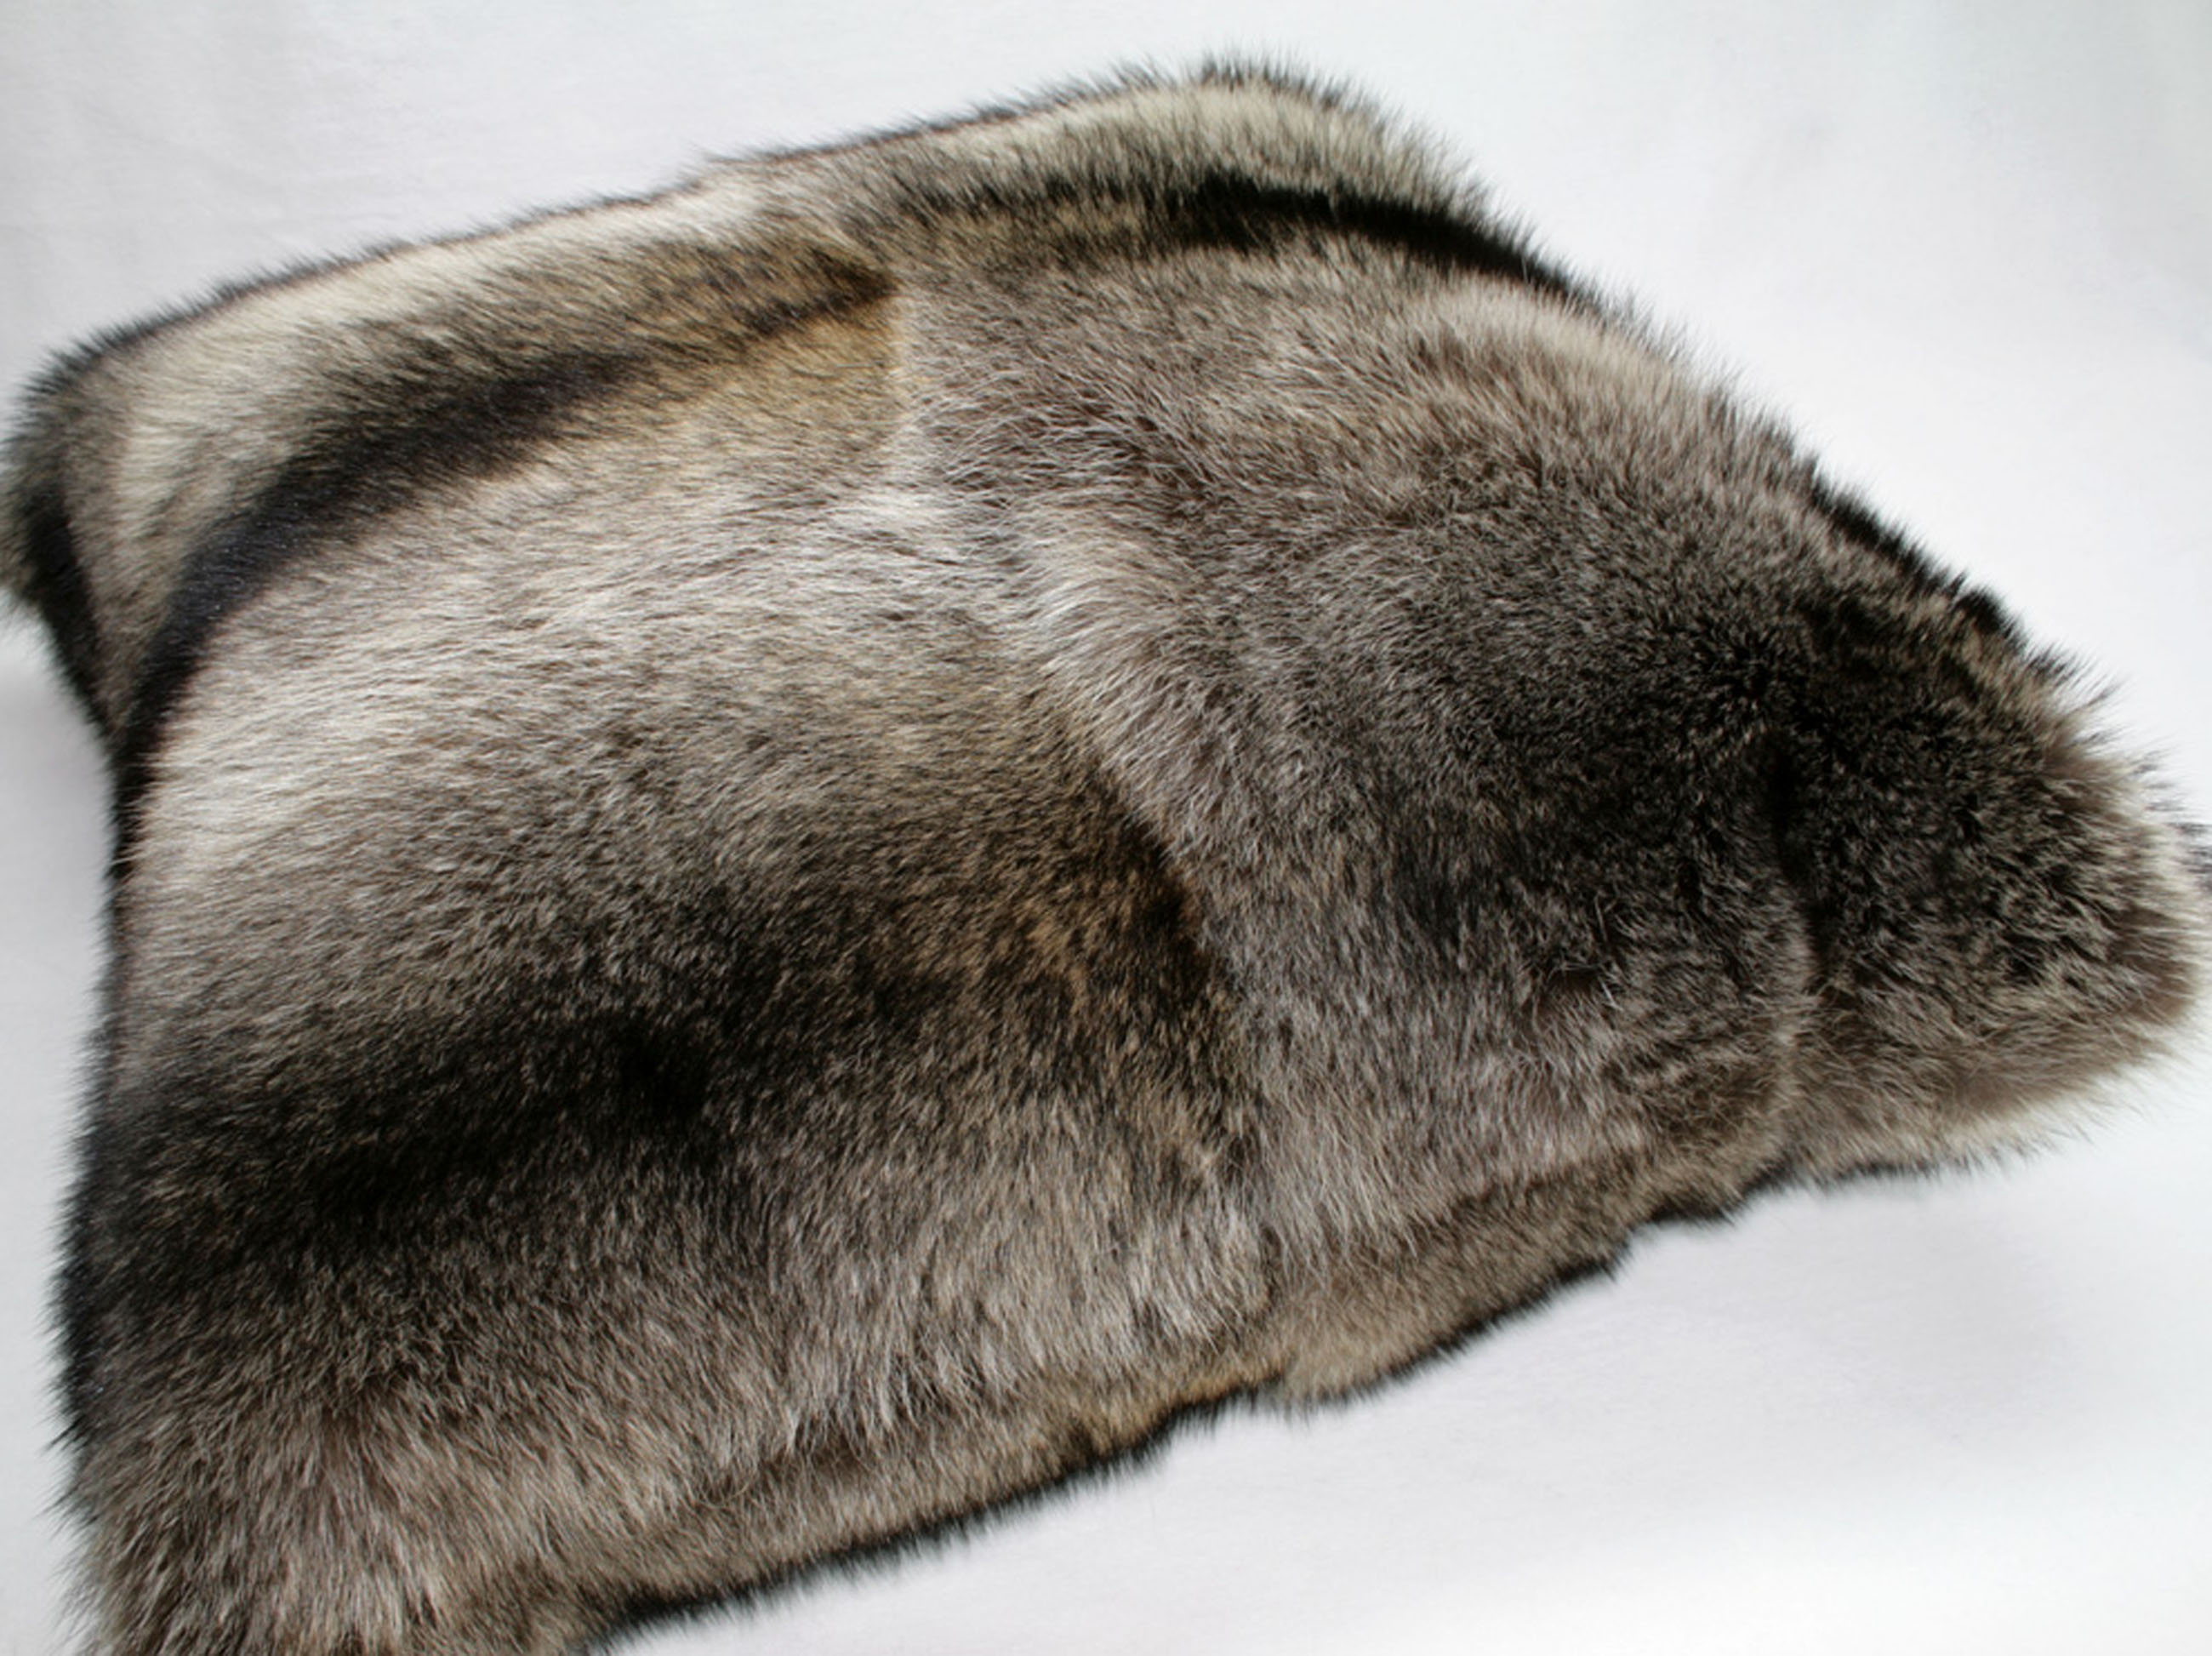 Fur pillow made from raccoon furs, fur on both sides